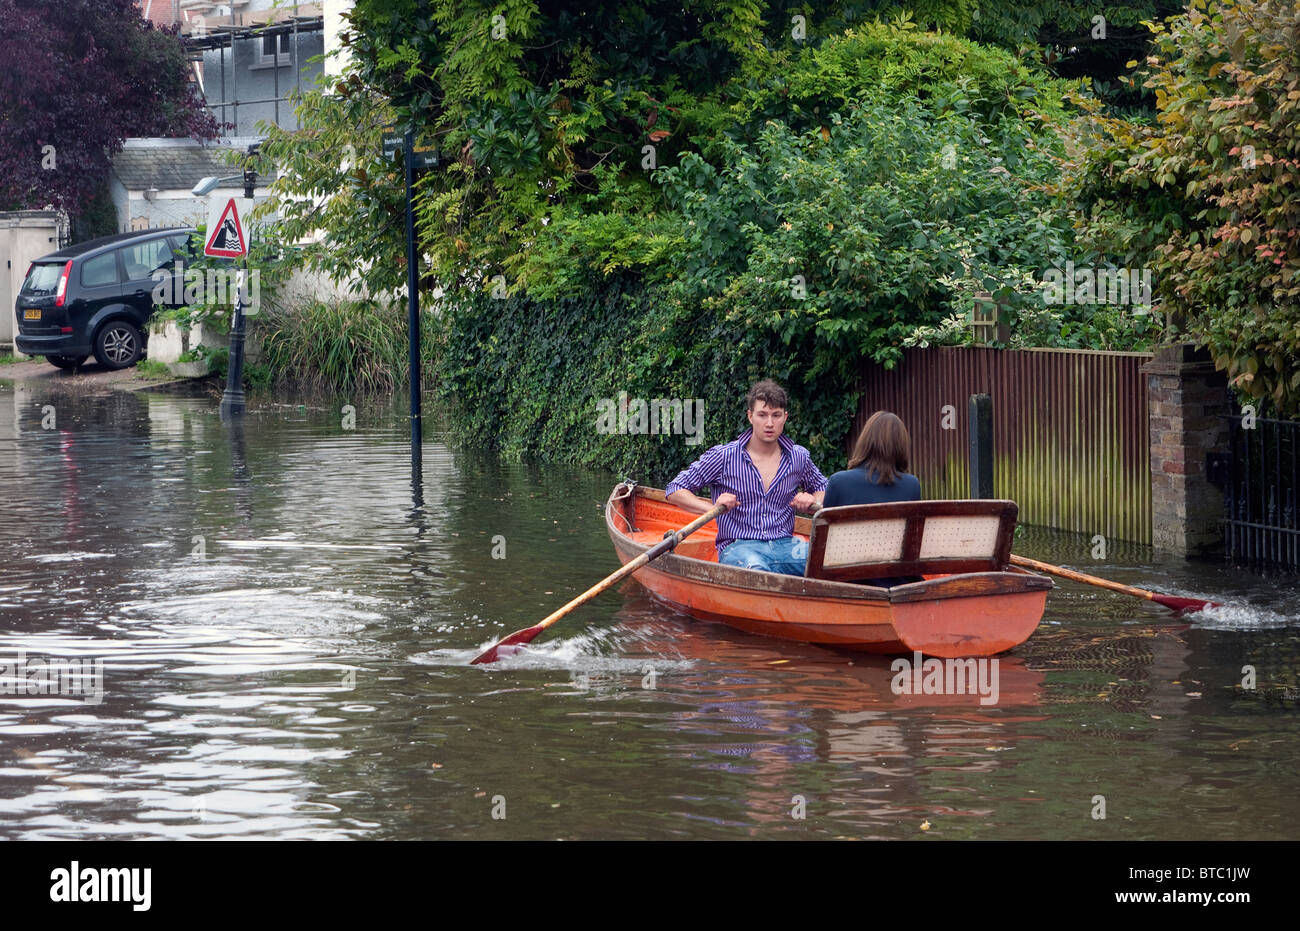 Flooded streets in Twickenham London at High tide on the River Thames Stock  Photo - Alamy